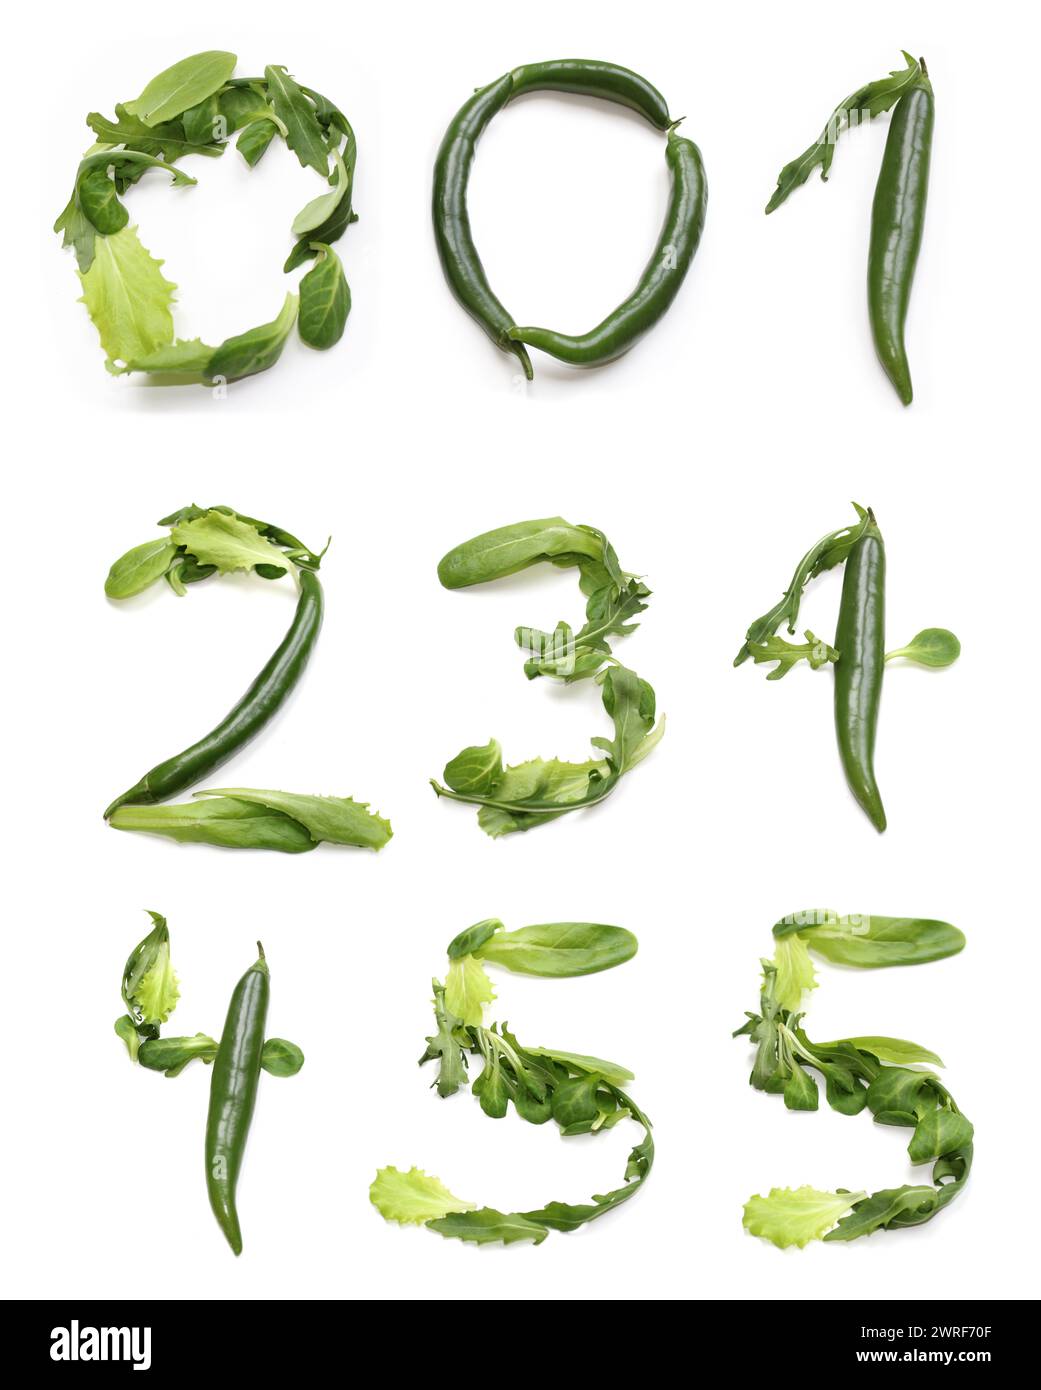 numbers 0 1 2 3 4 5 from green chili pepper, green salad lettuce leaf. vegetarian vegetable number one, two three four five, vegan bowl, birthday meal Stock Photo